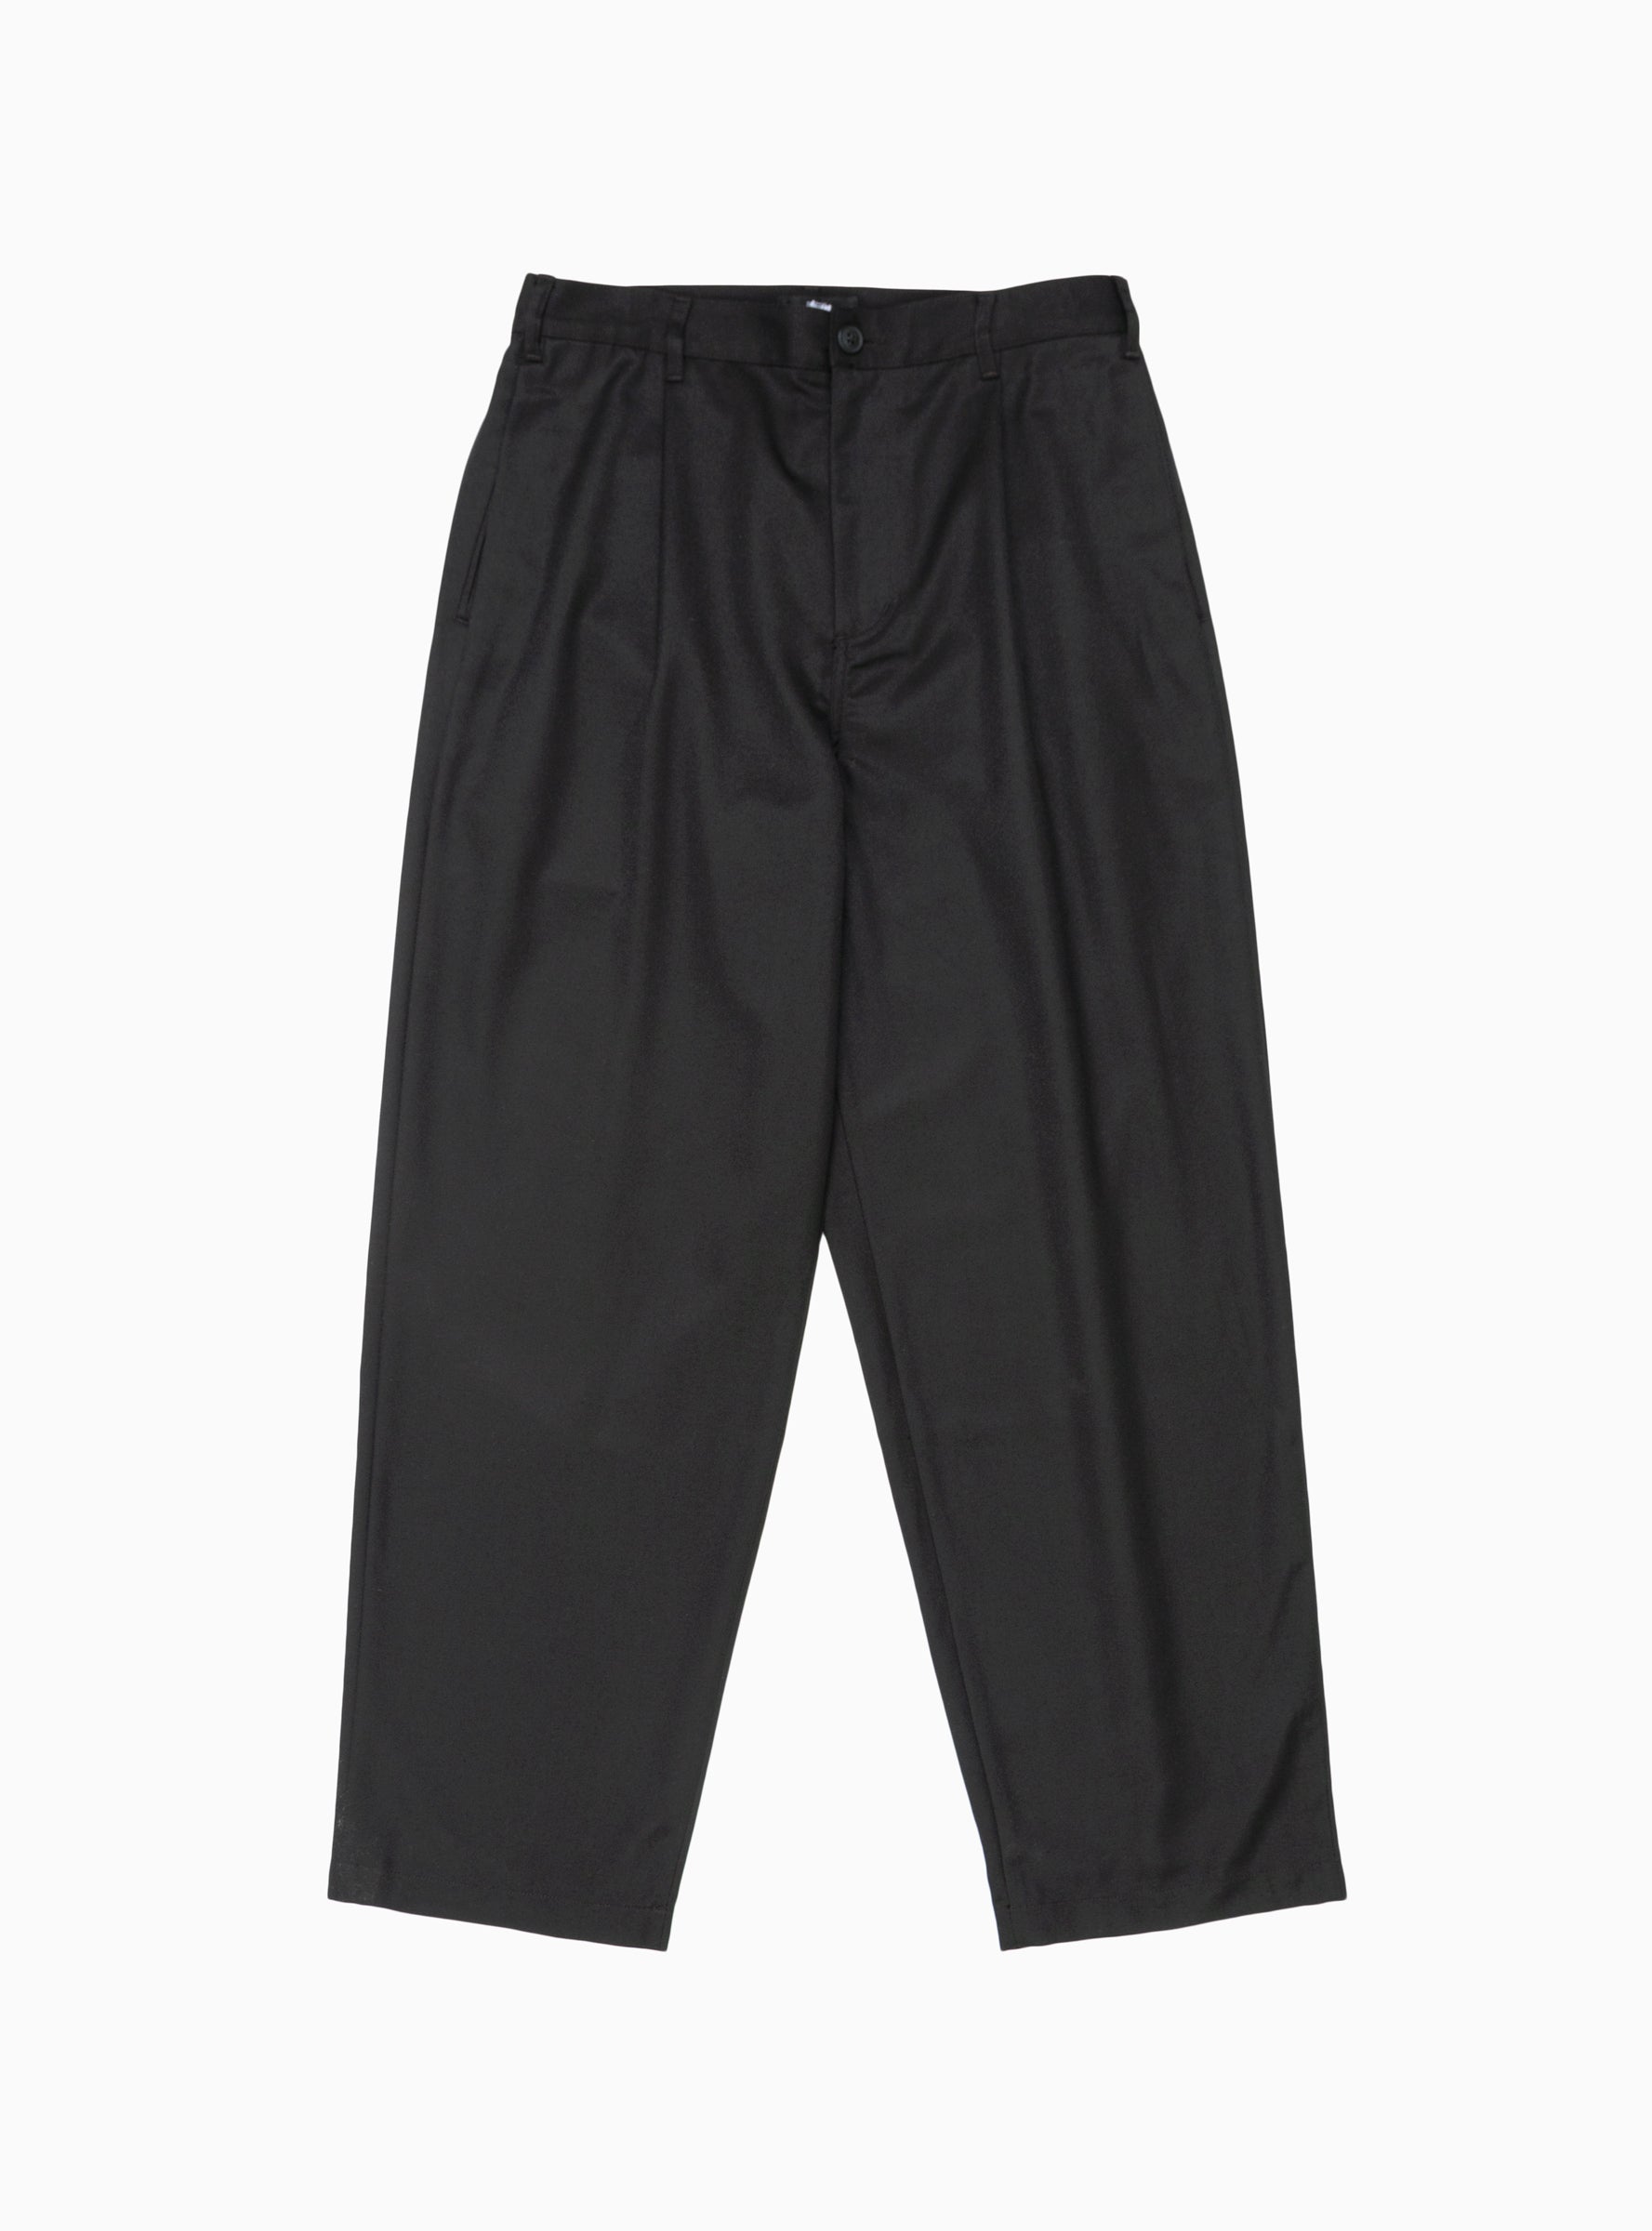 Buy CASUAL BLACK WIDE LEG PLEATED PANTS for Women Online in India